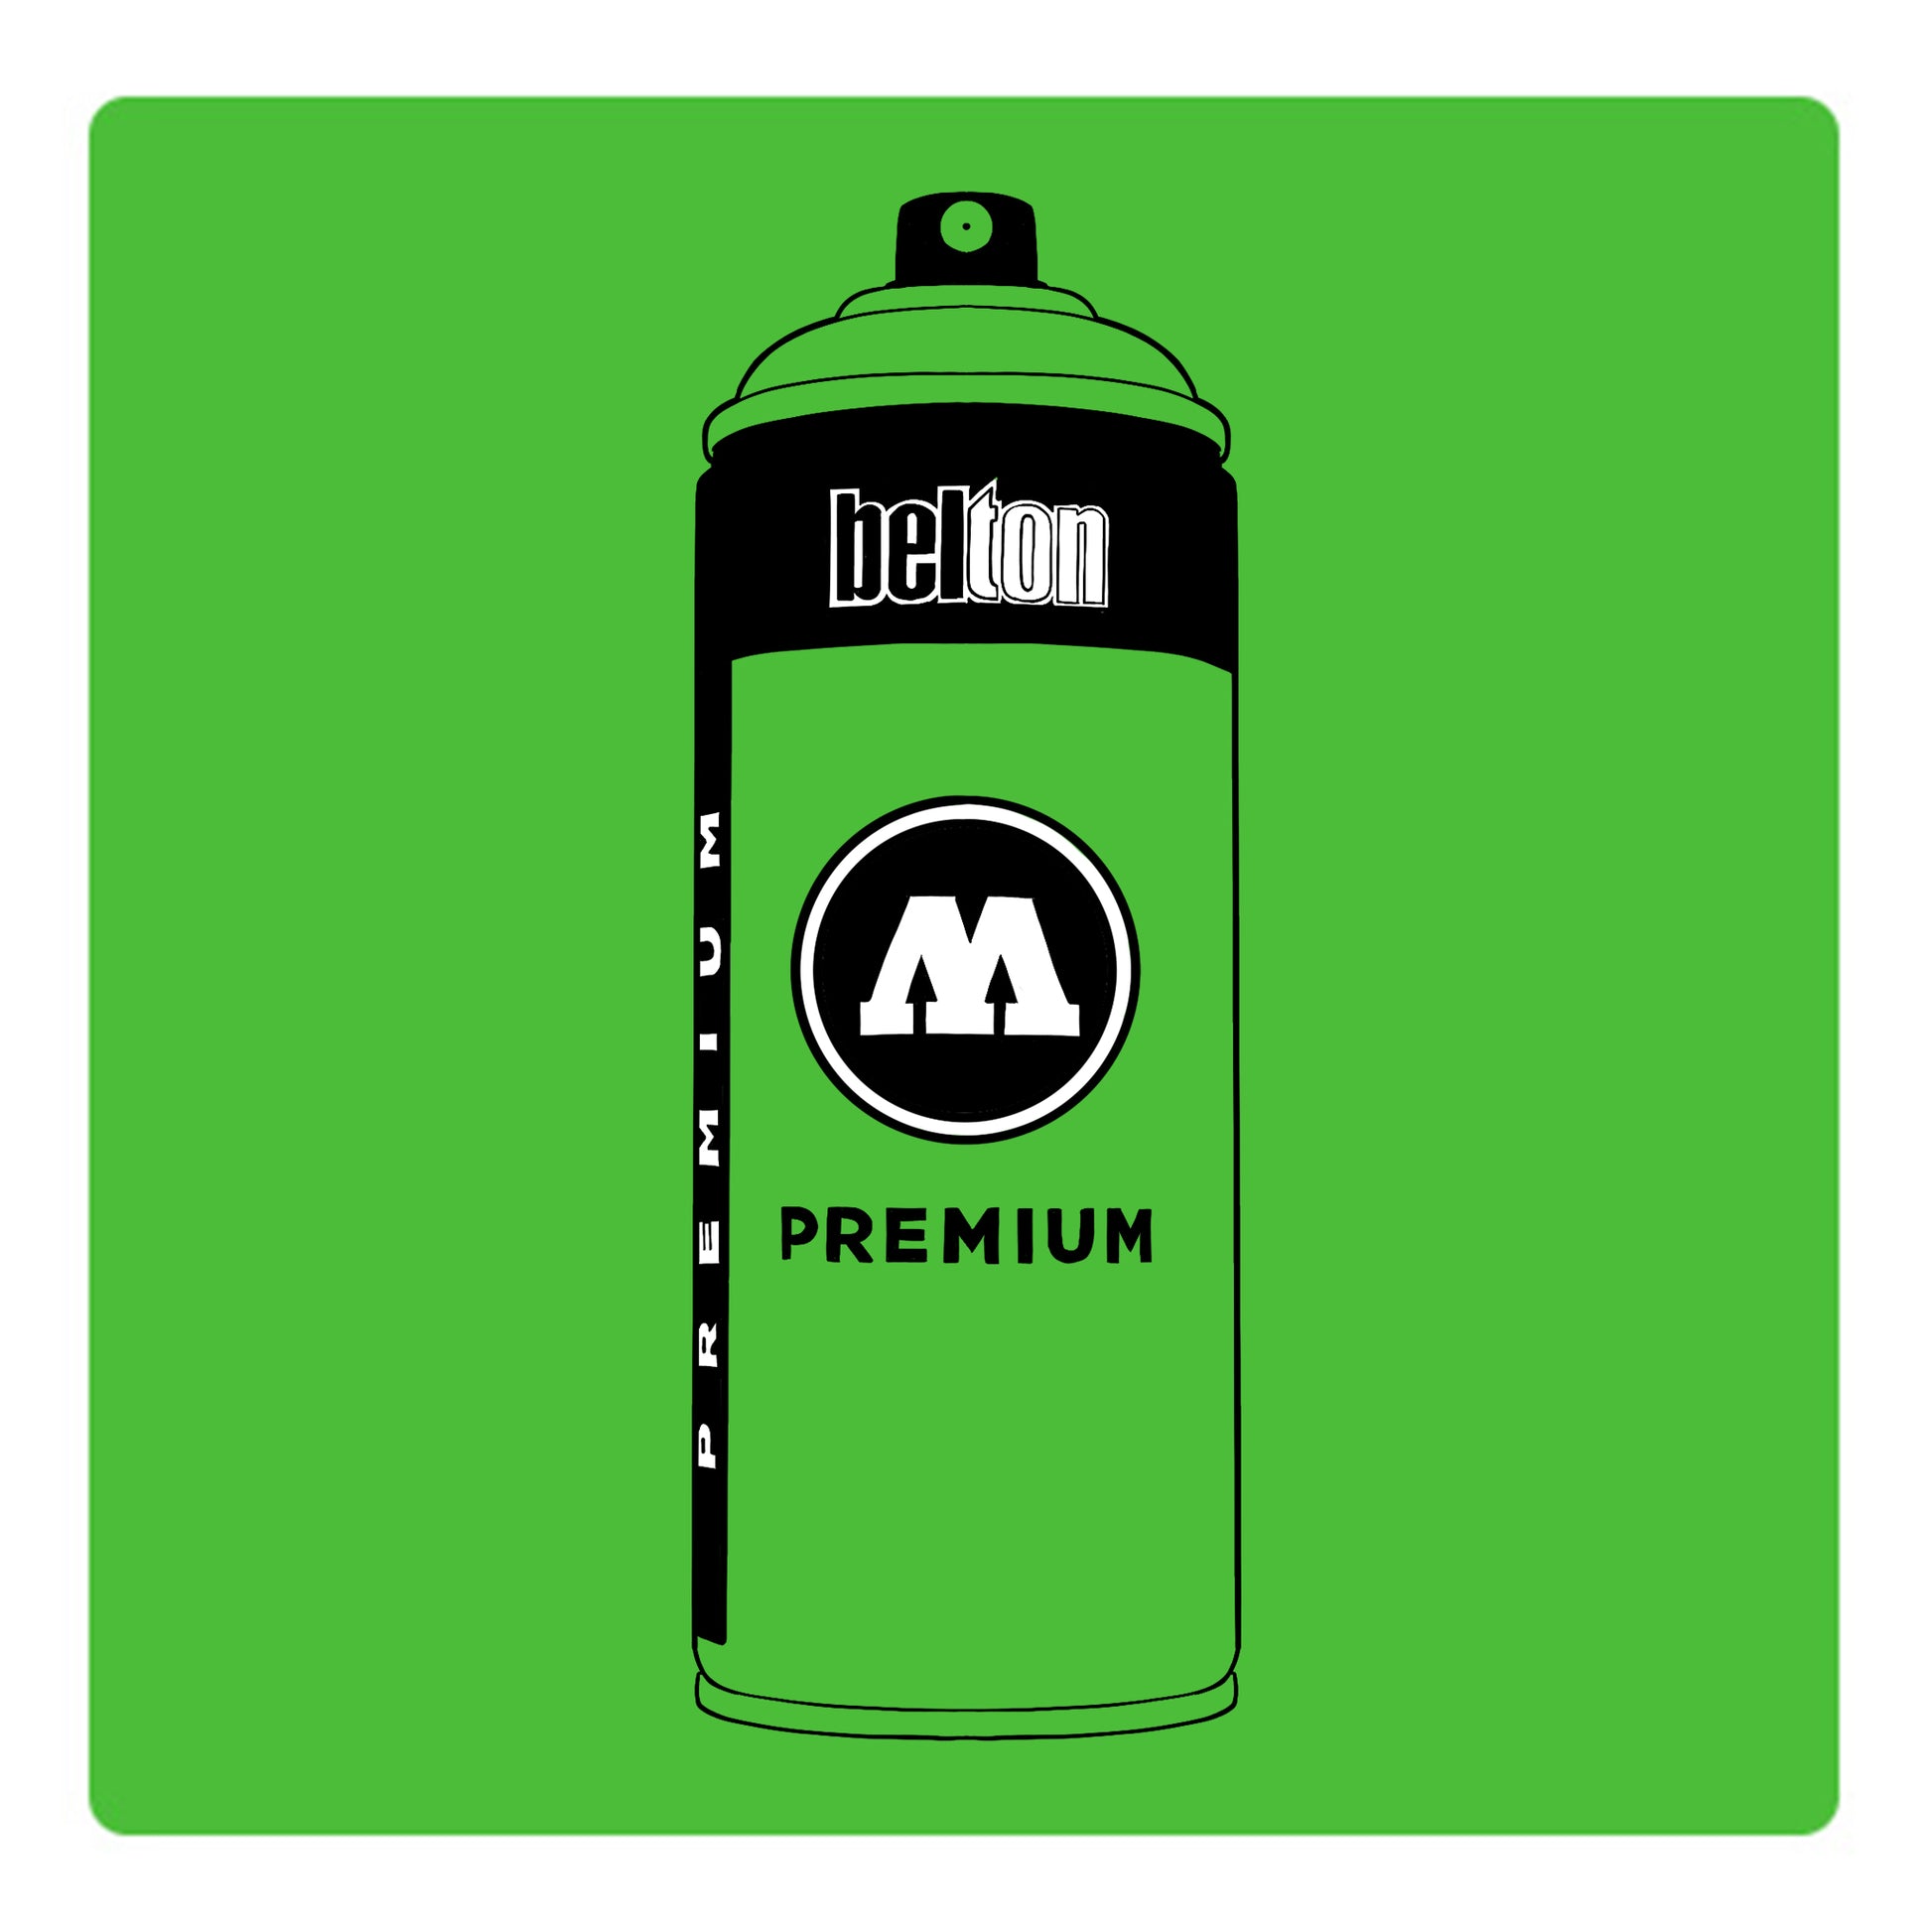 A black outline drawing of a neon green spray paint can with the words "belton","premium" and the letter"M" written on the face in black and white font. The background is a color swatch of the same neon green with a white border